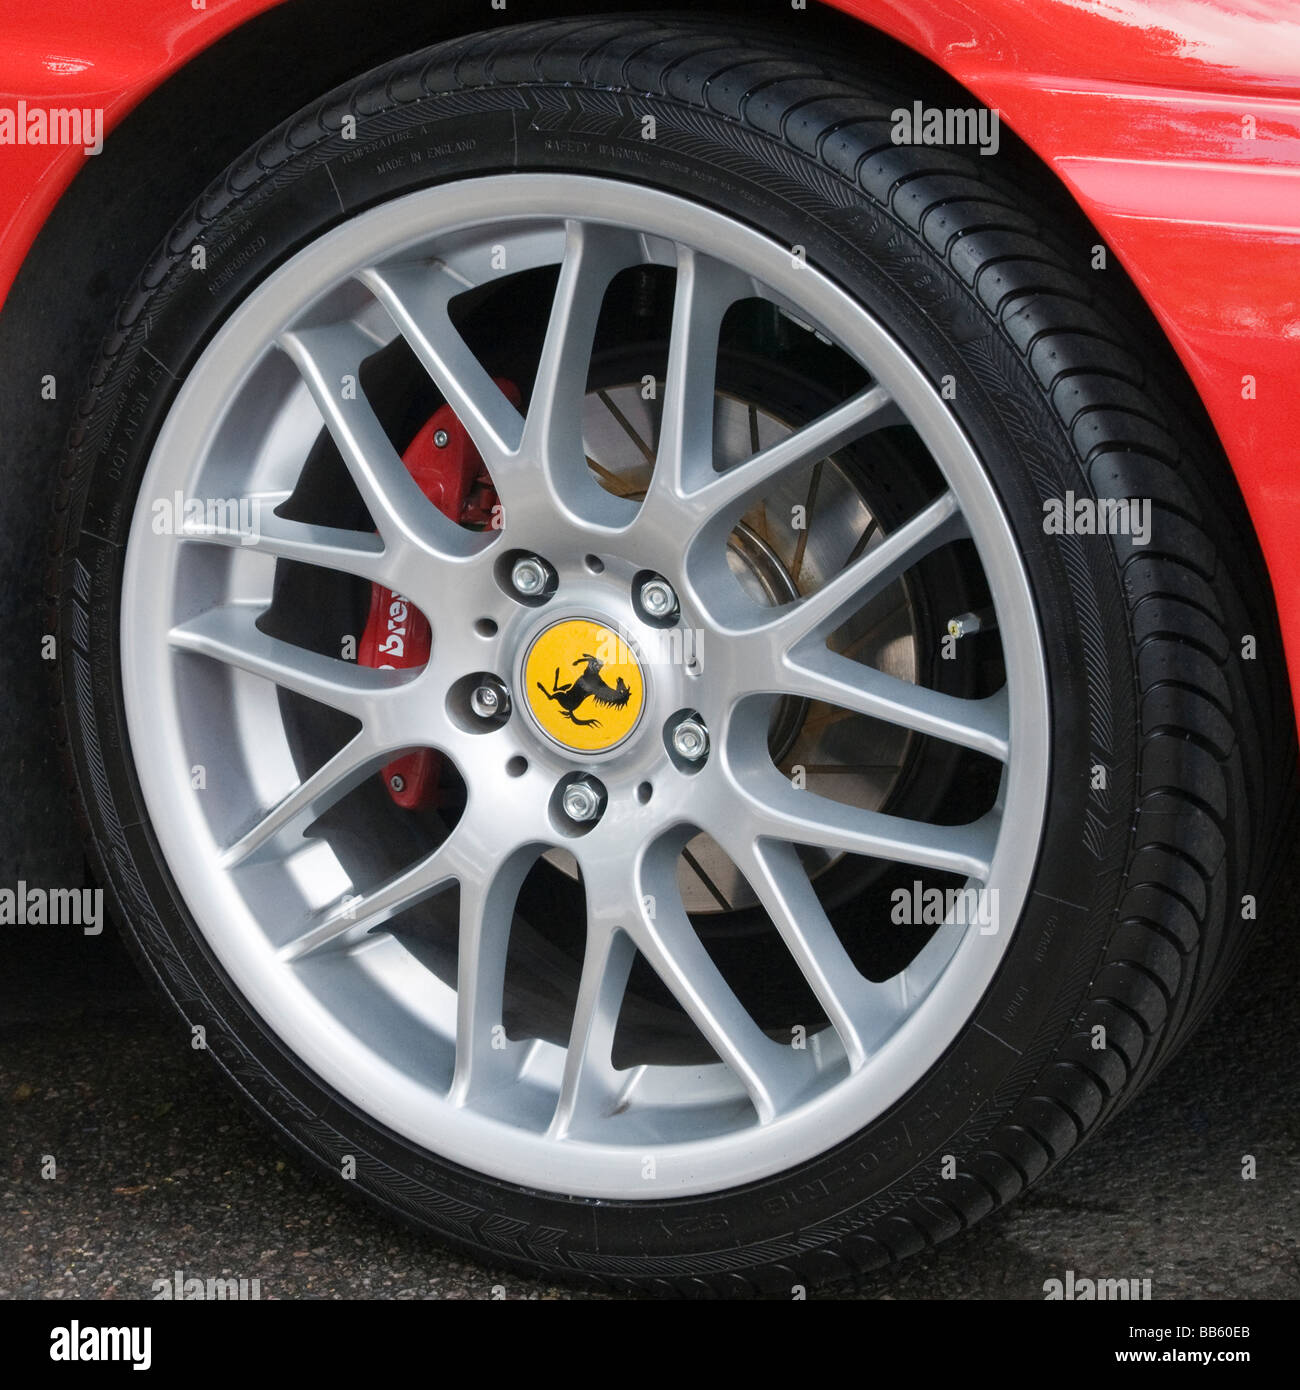 Classic car ferrari alloy wheel, car in red View from the side. Close up (macro) Stock Photo